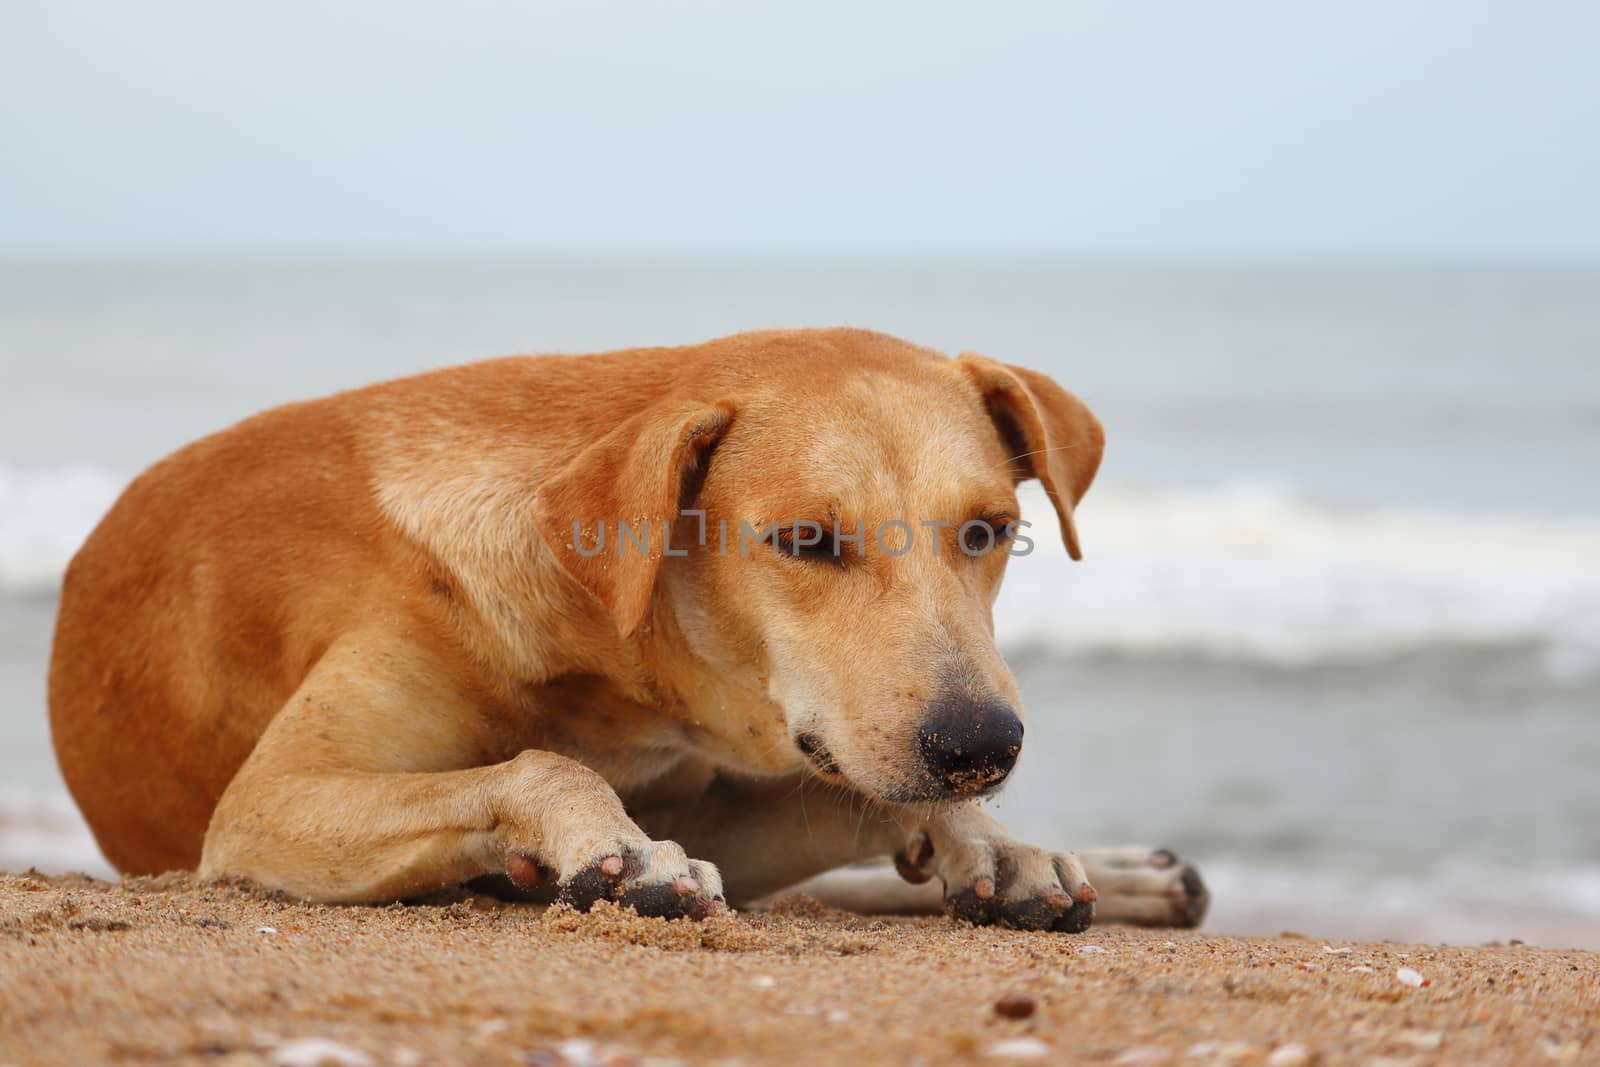 A yellow dog lying on the beach to escape the heat